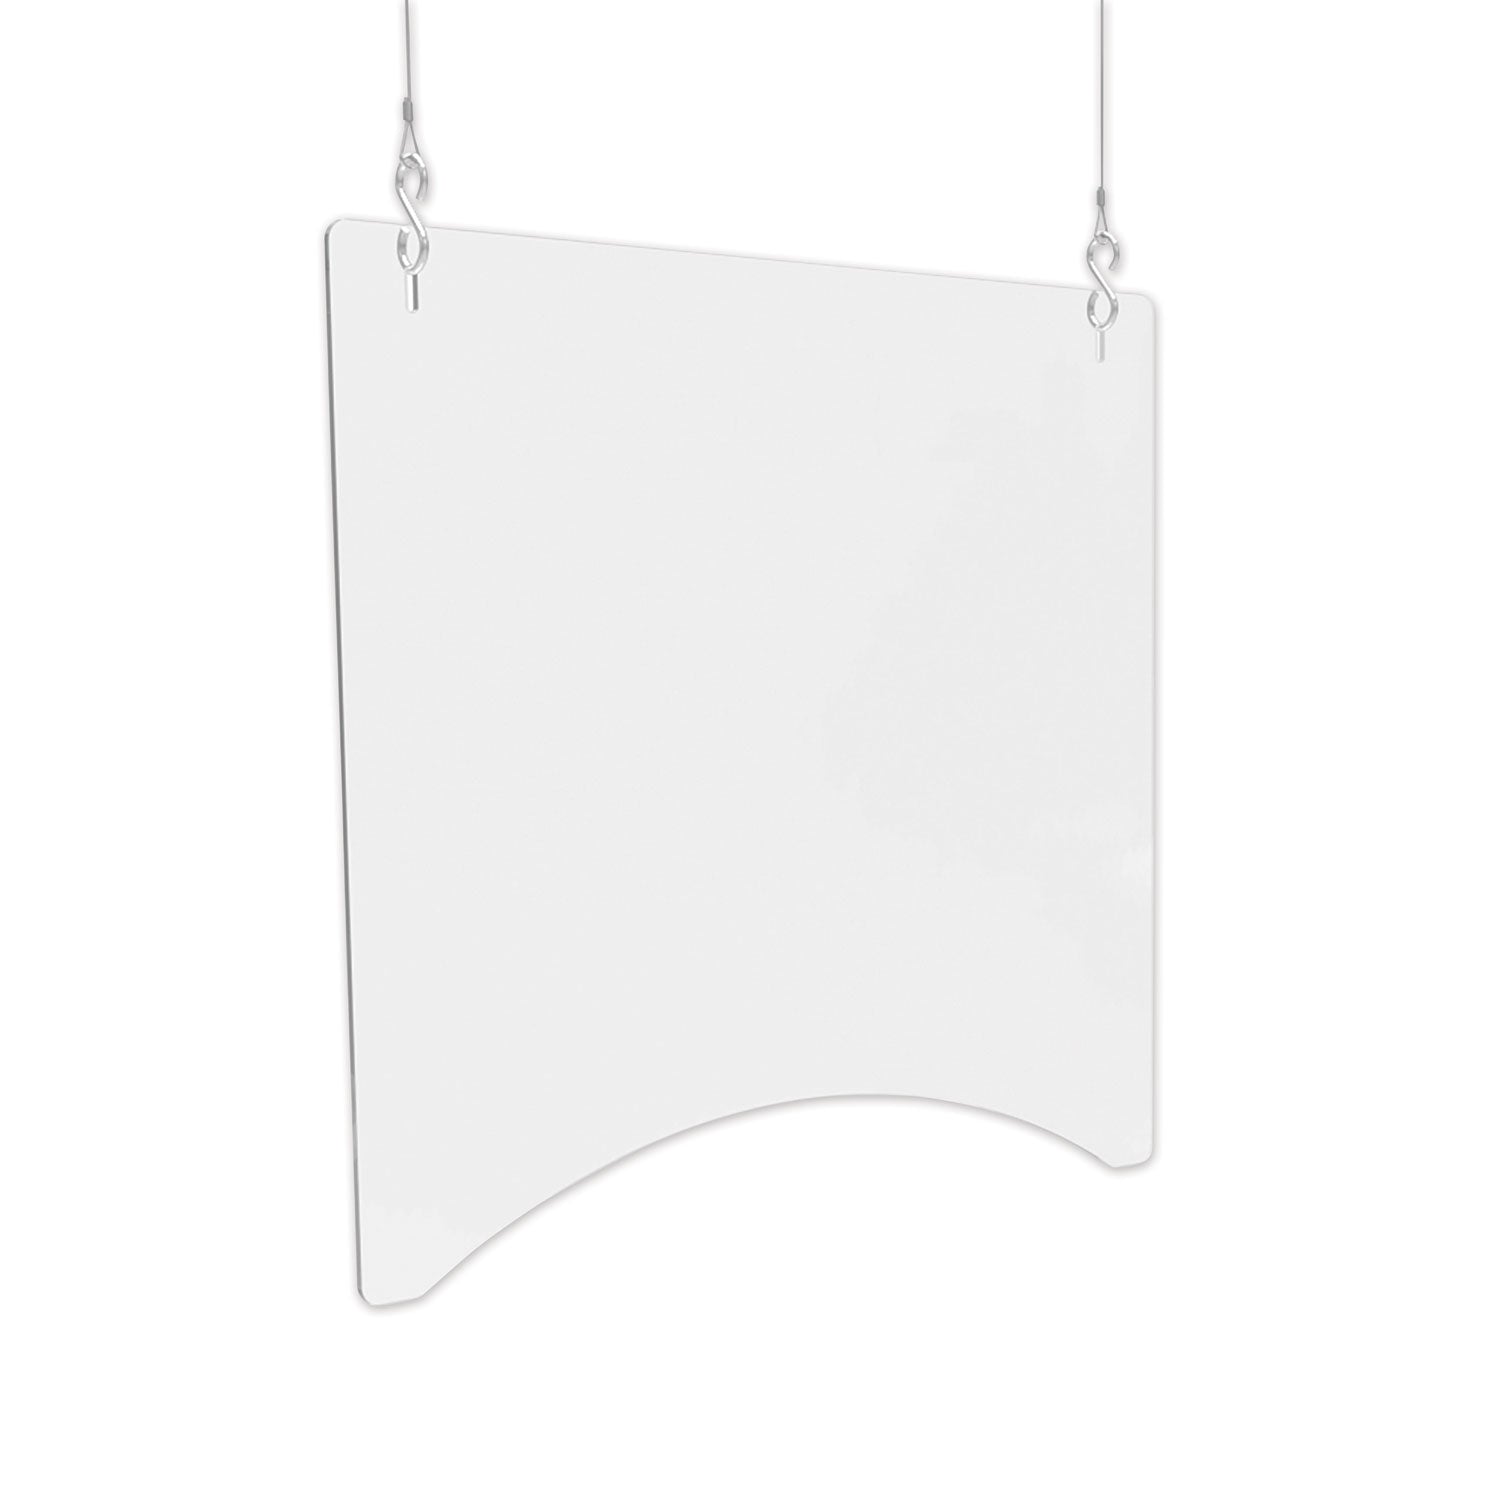 hanging-barrier-2375-x-2375-polycarbonate-clear-2-carton_defpbchpc2424 - 1